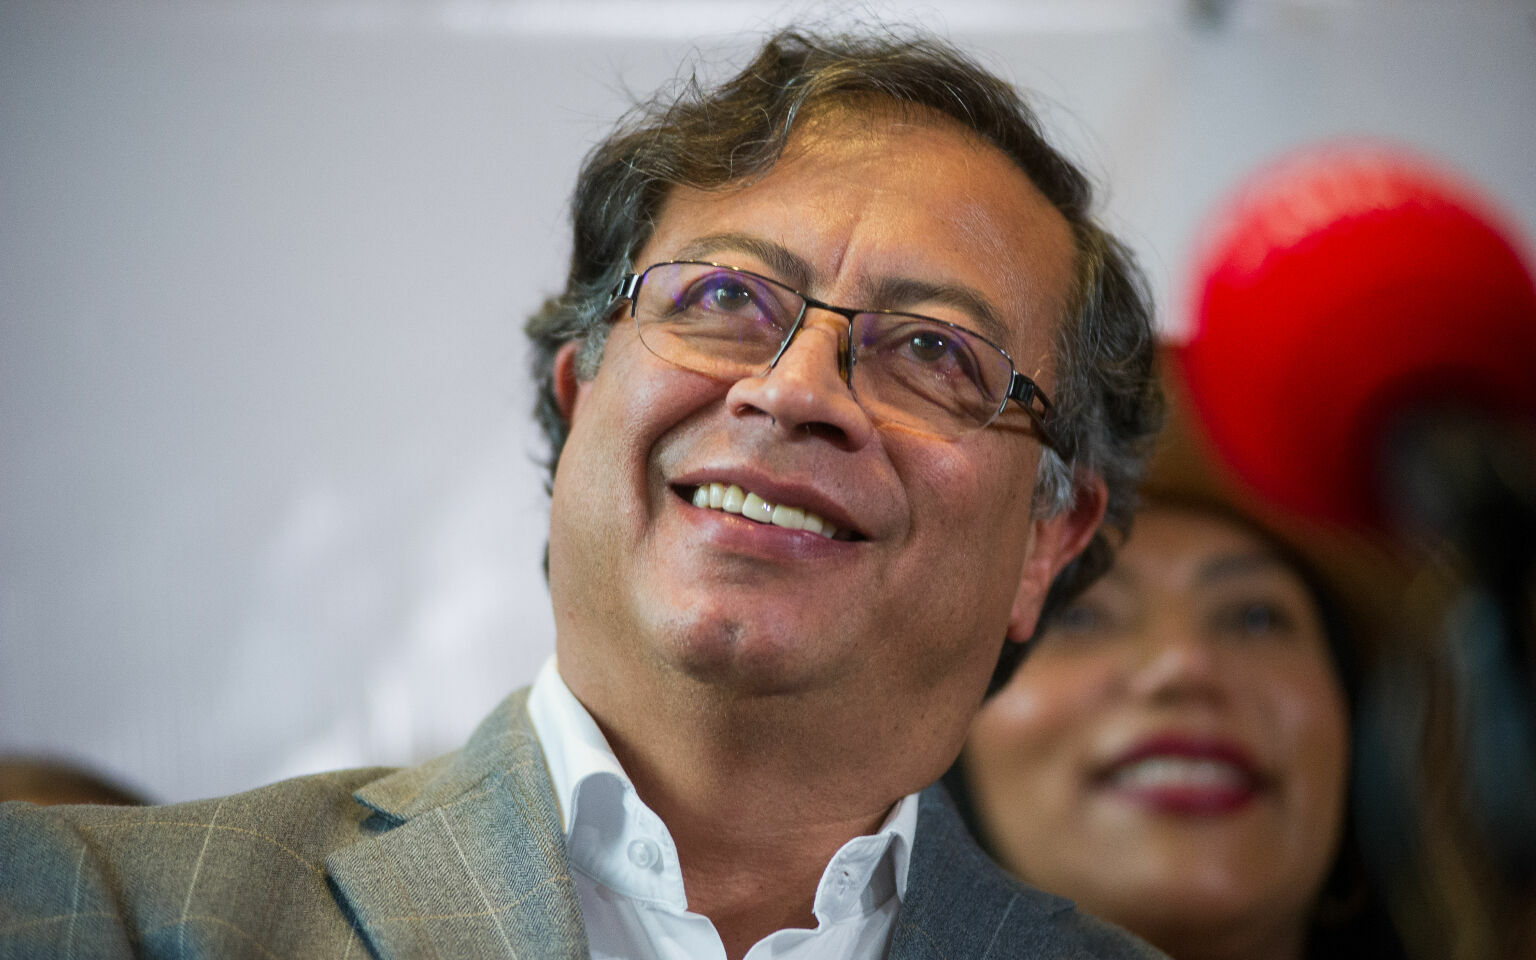 Gustavo Petro became the first representative of the left forces to lead Colombia